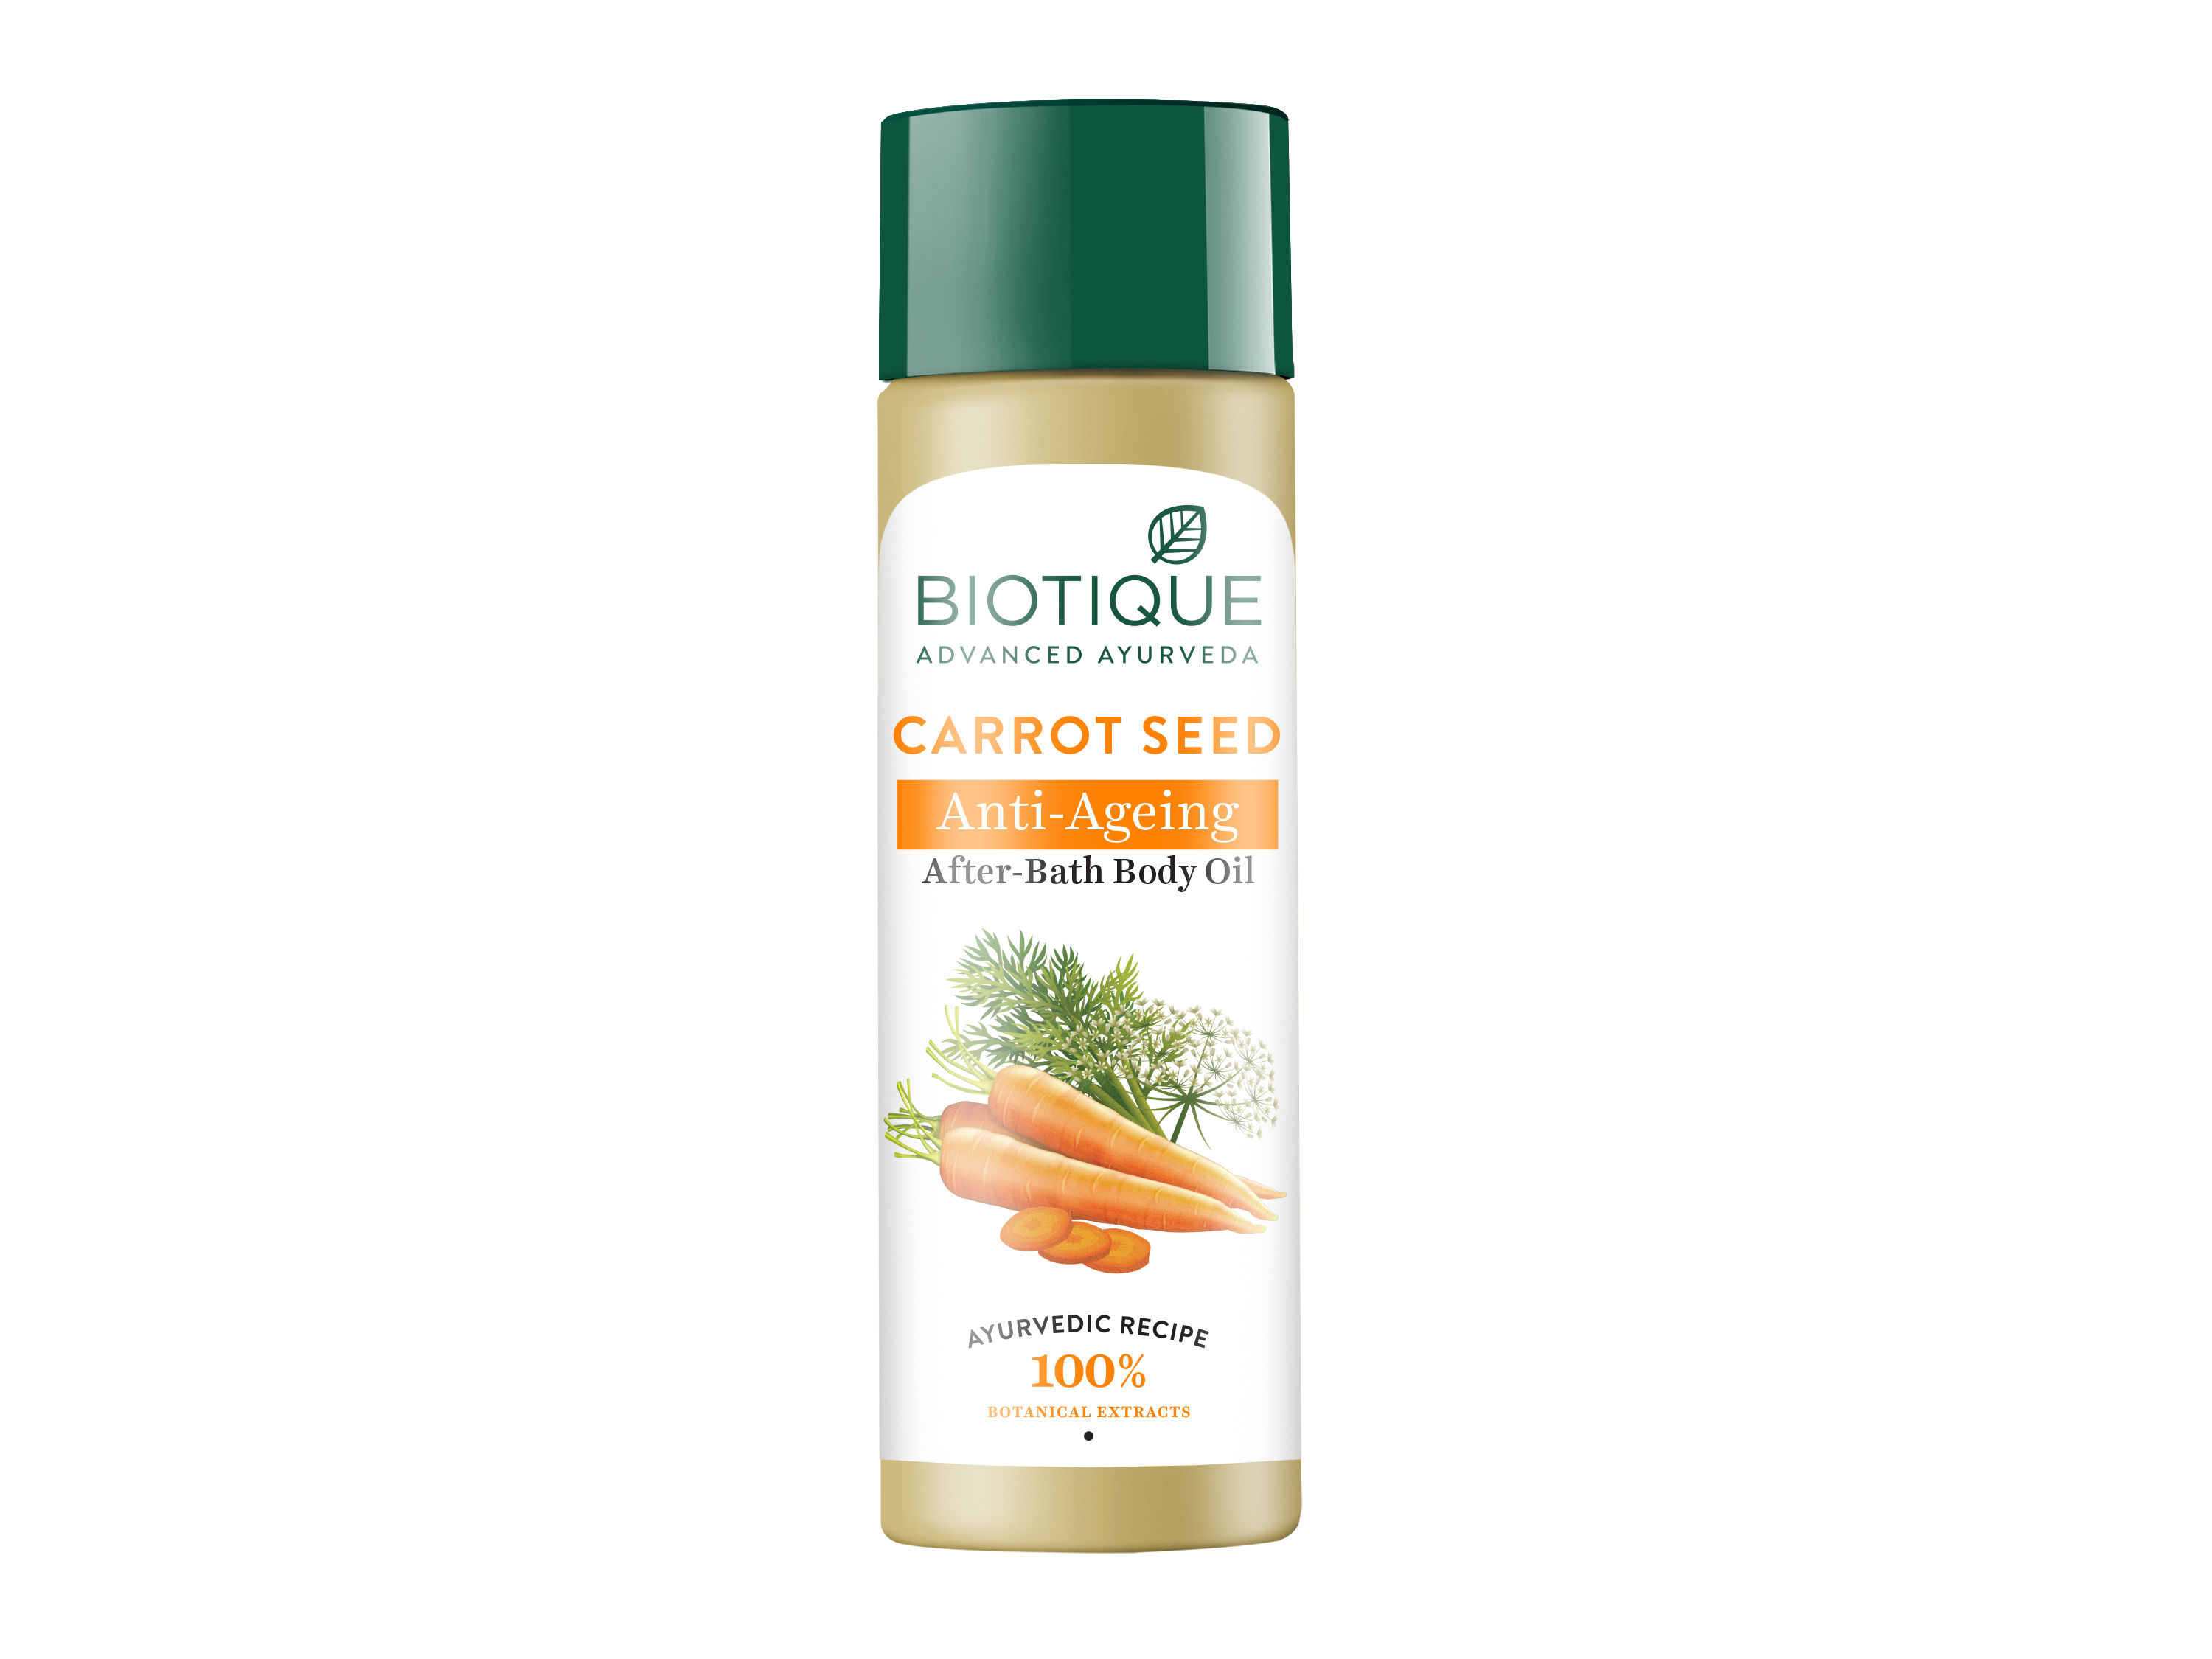 Biotique Carrot Seed Anti-Aging After-Bath Body Oil